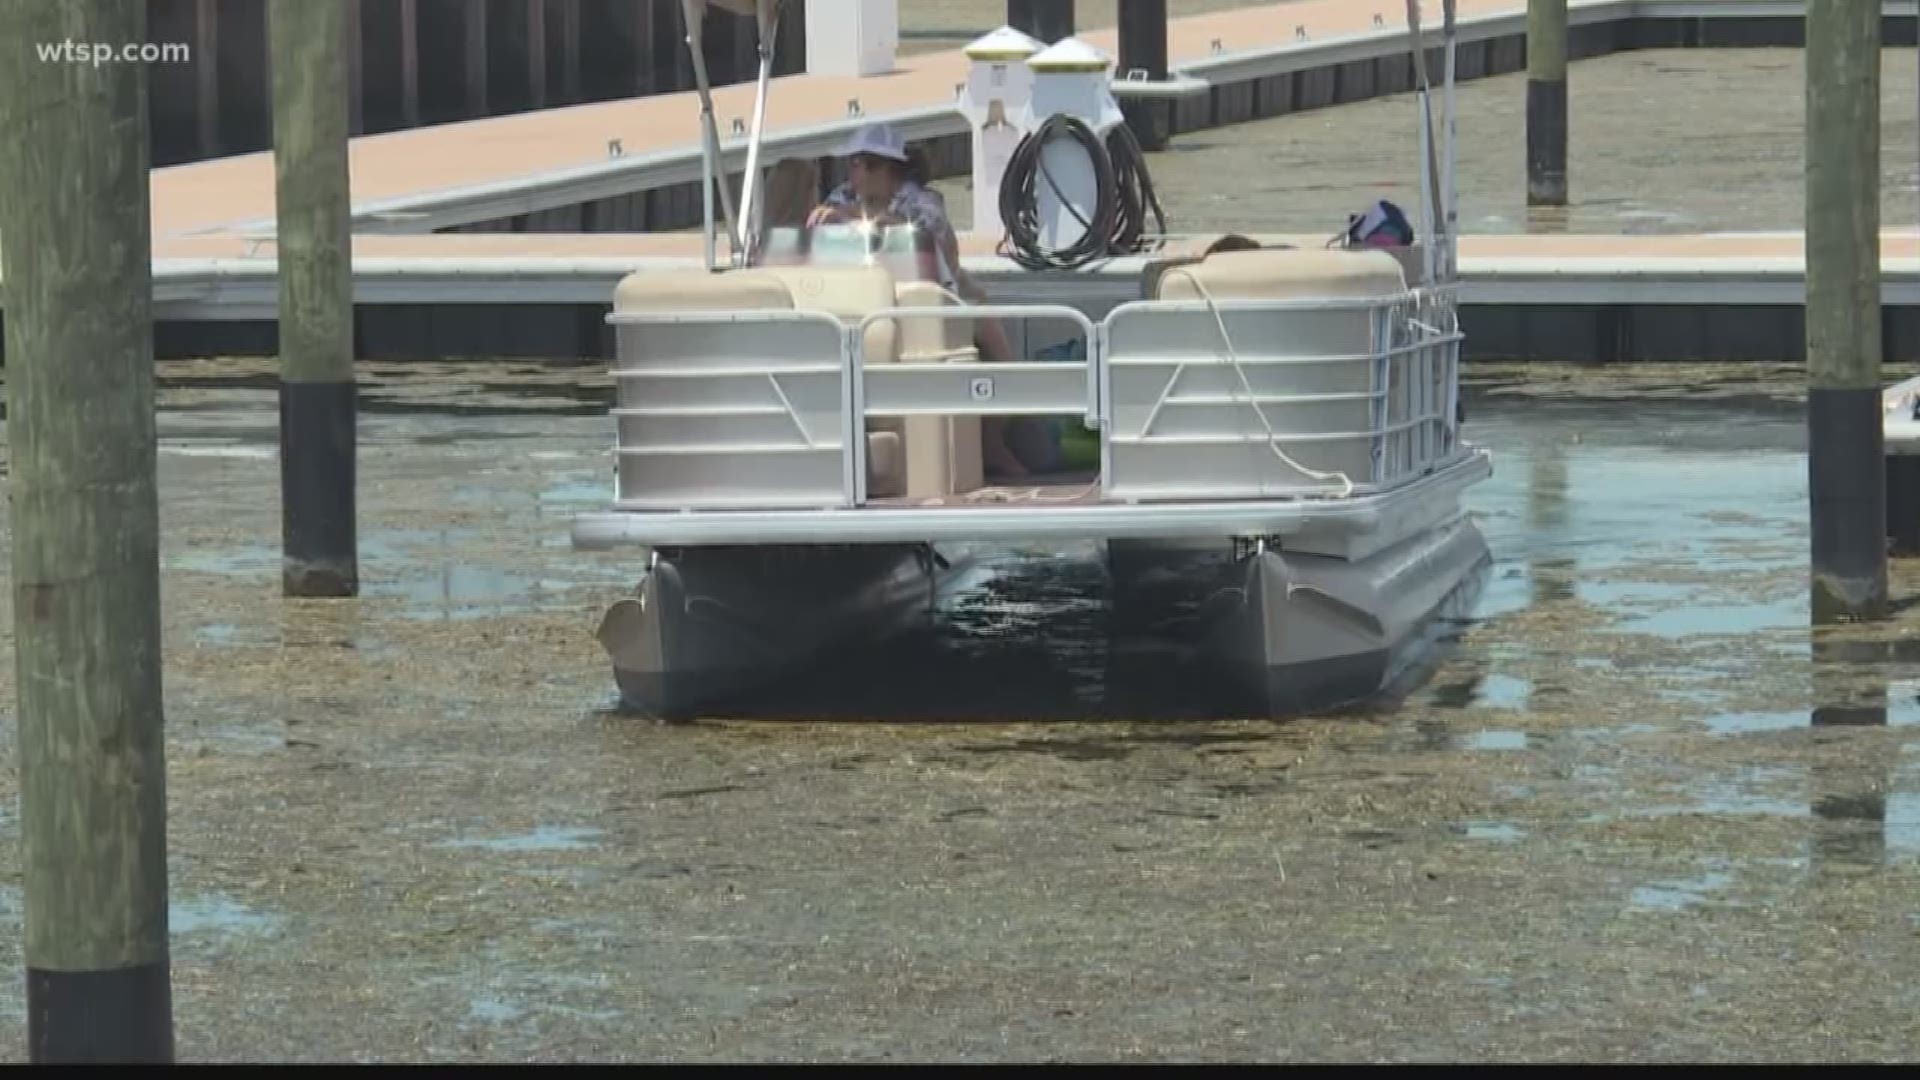 Some workers at the Freedom Boat Club say the algae blew in two days ago and smelled like a sewer.